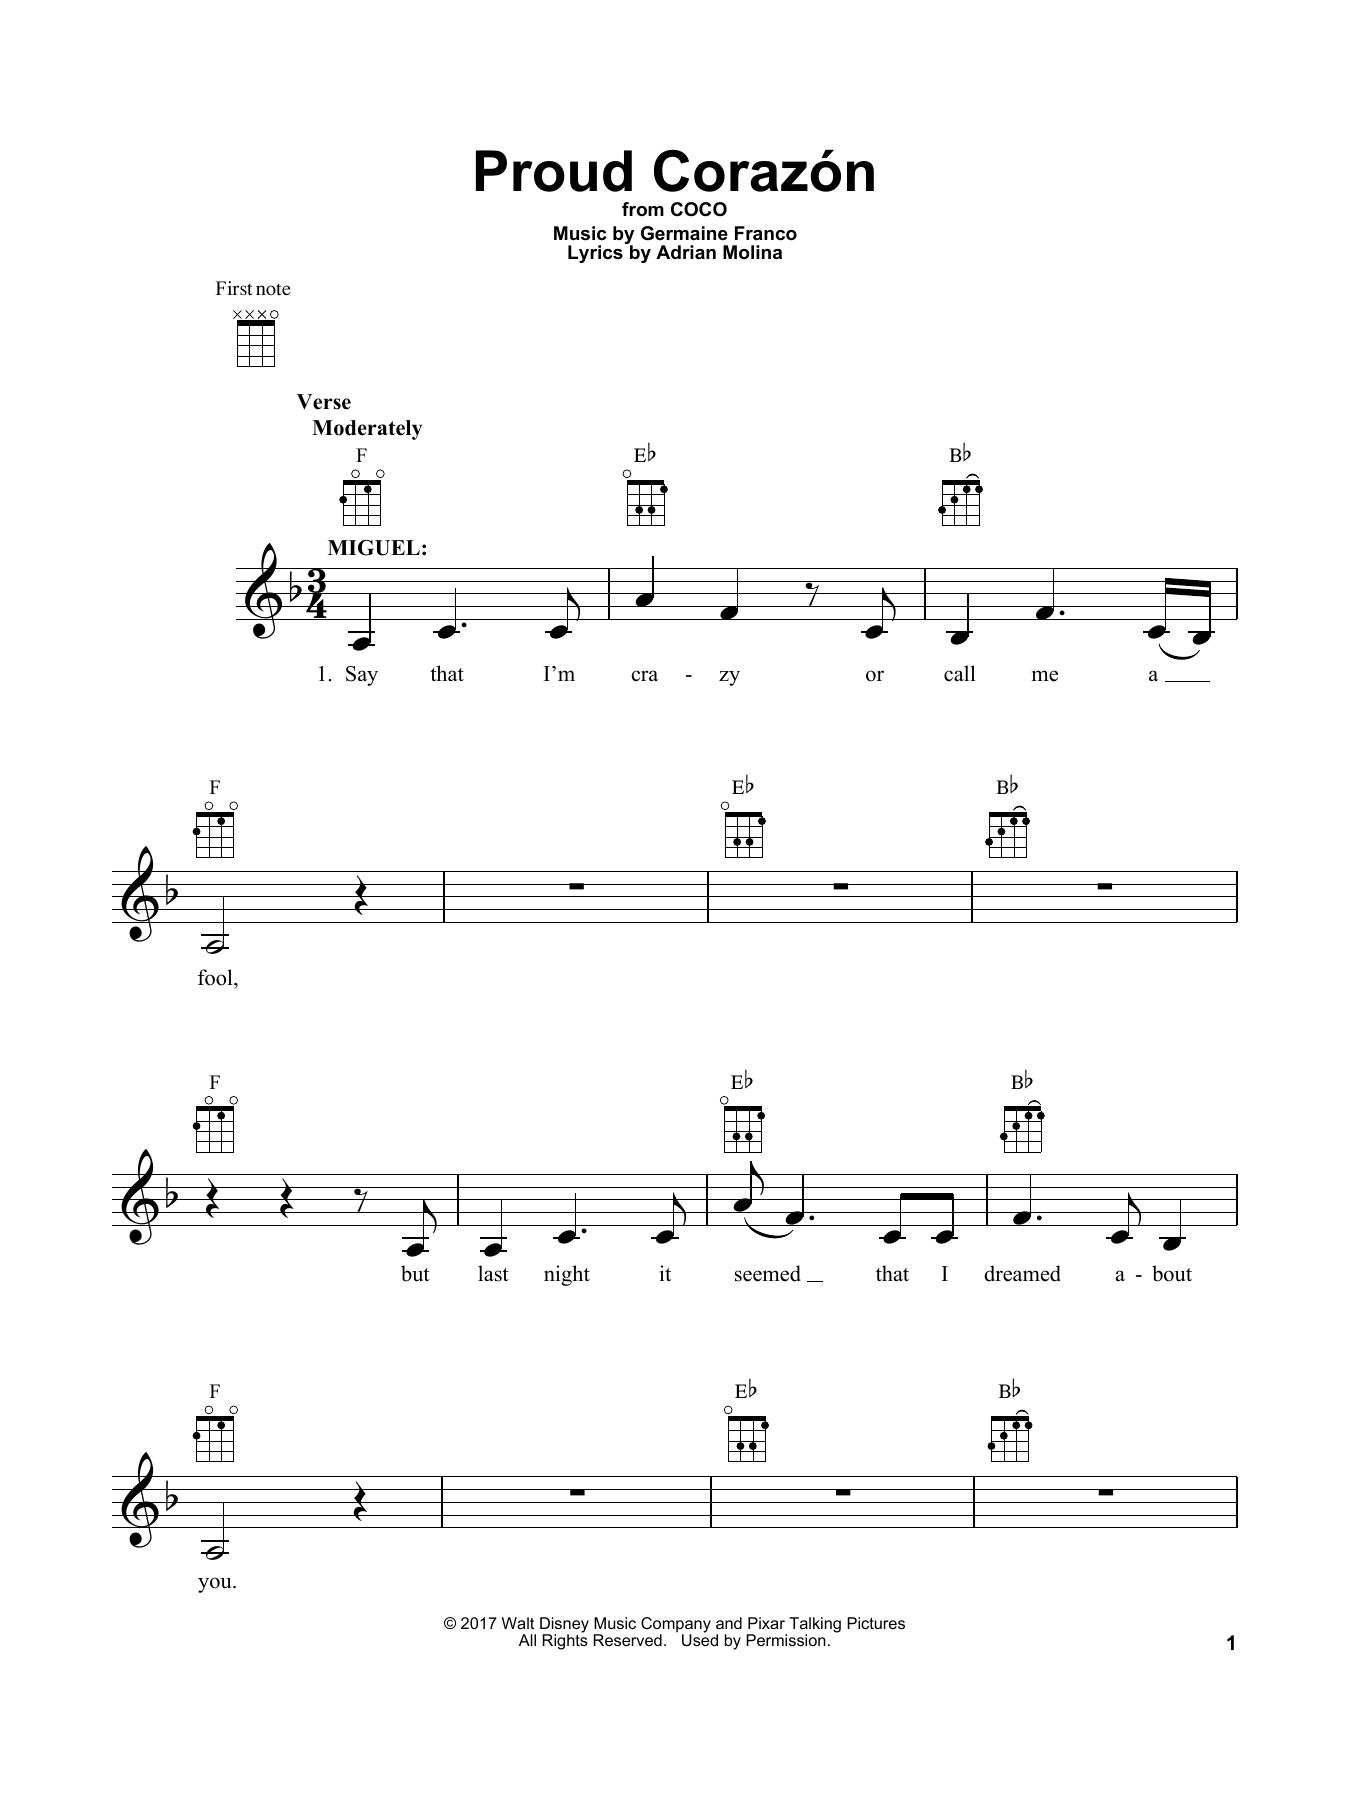 Download Germaine Franco & Adrian Molina Proud Corazon (from Coco) Sheet Music